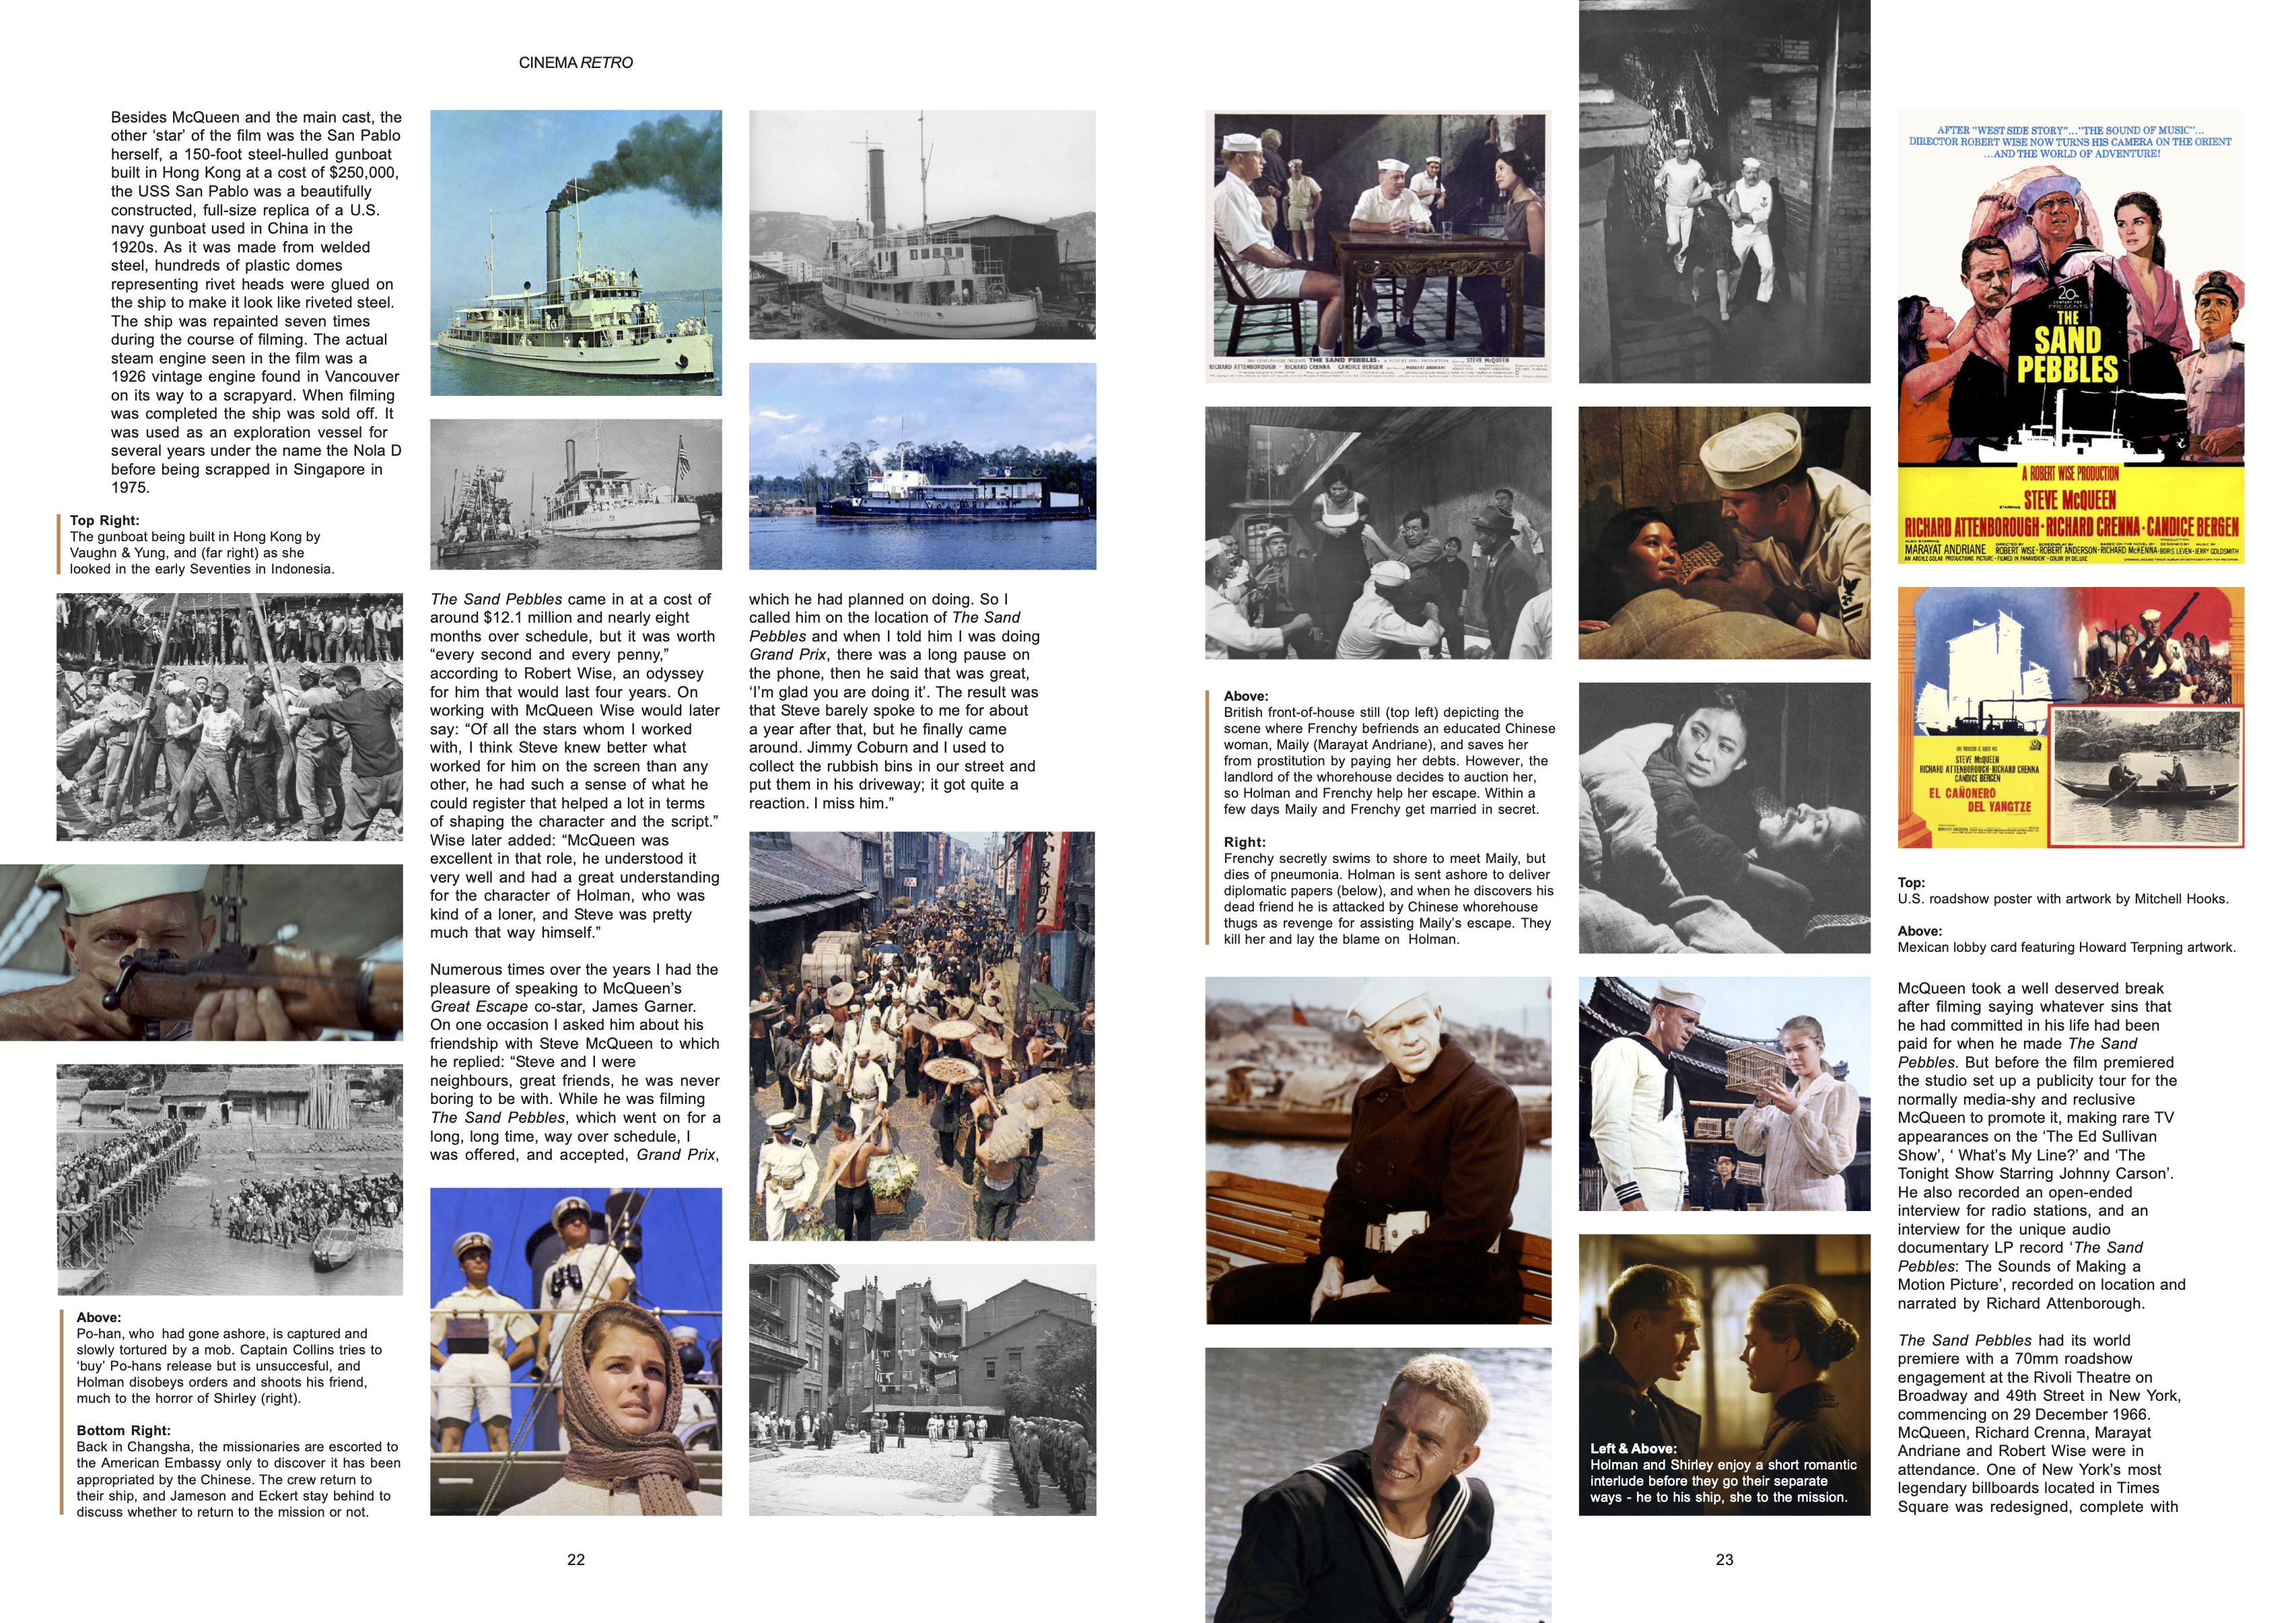 Cinema Retro Issue 52 Vol 18 Pages 22 & 23 - The Sand Pebbles - by James Sherlock